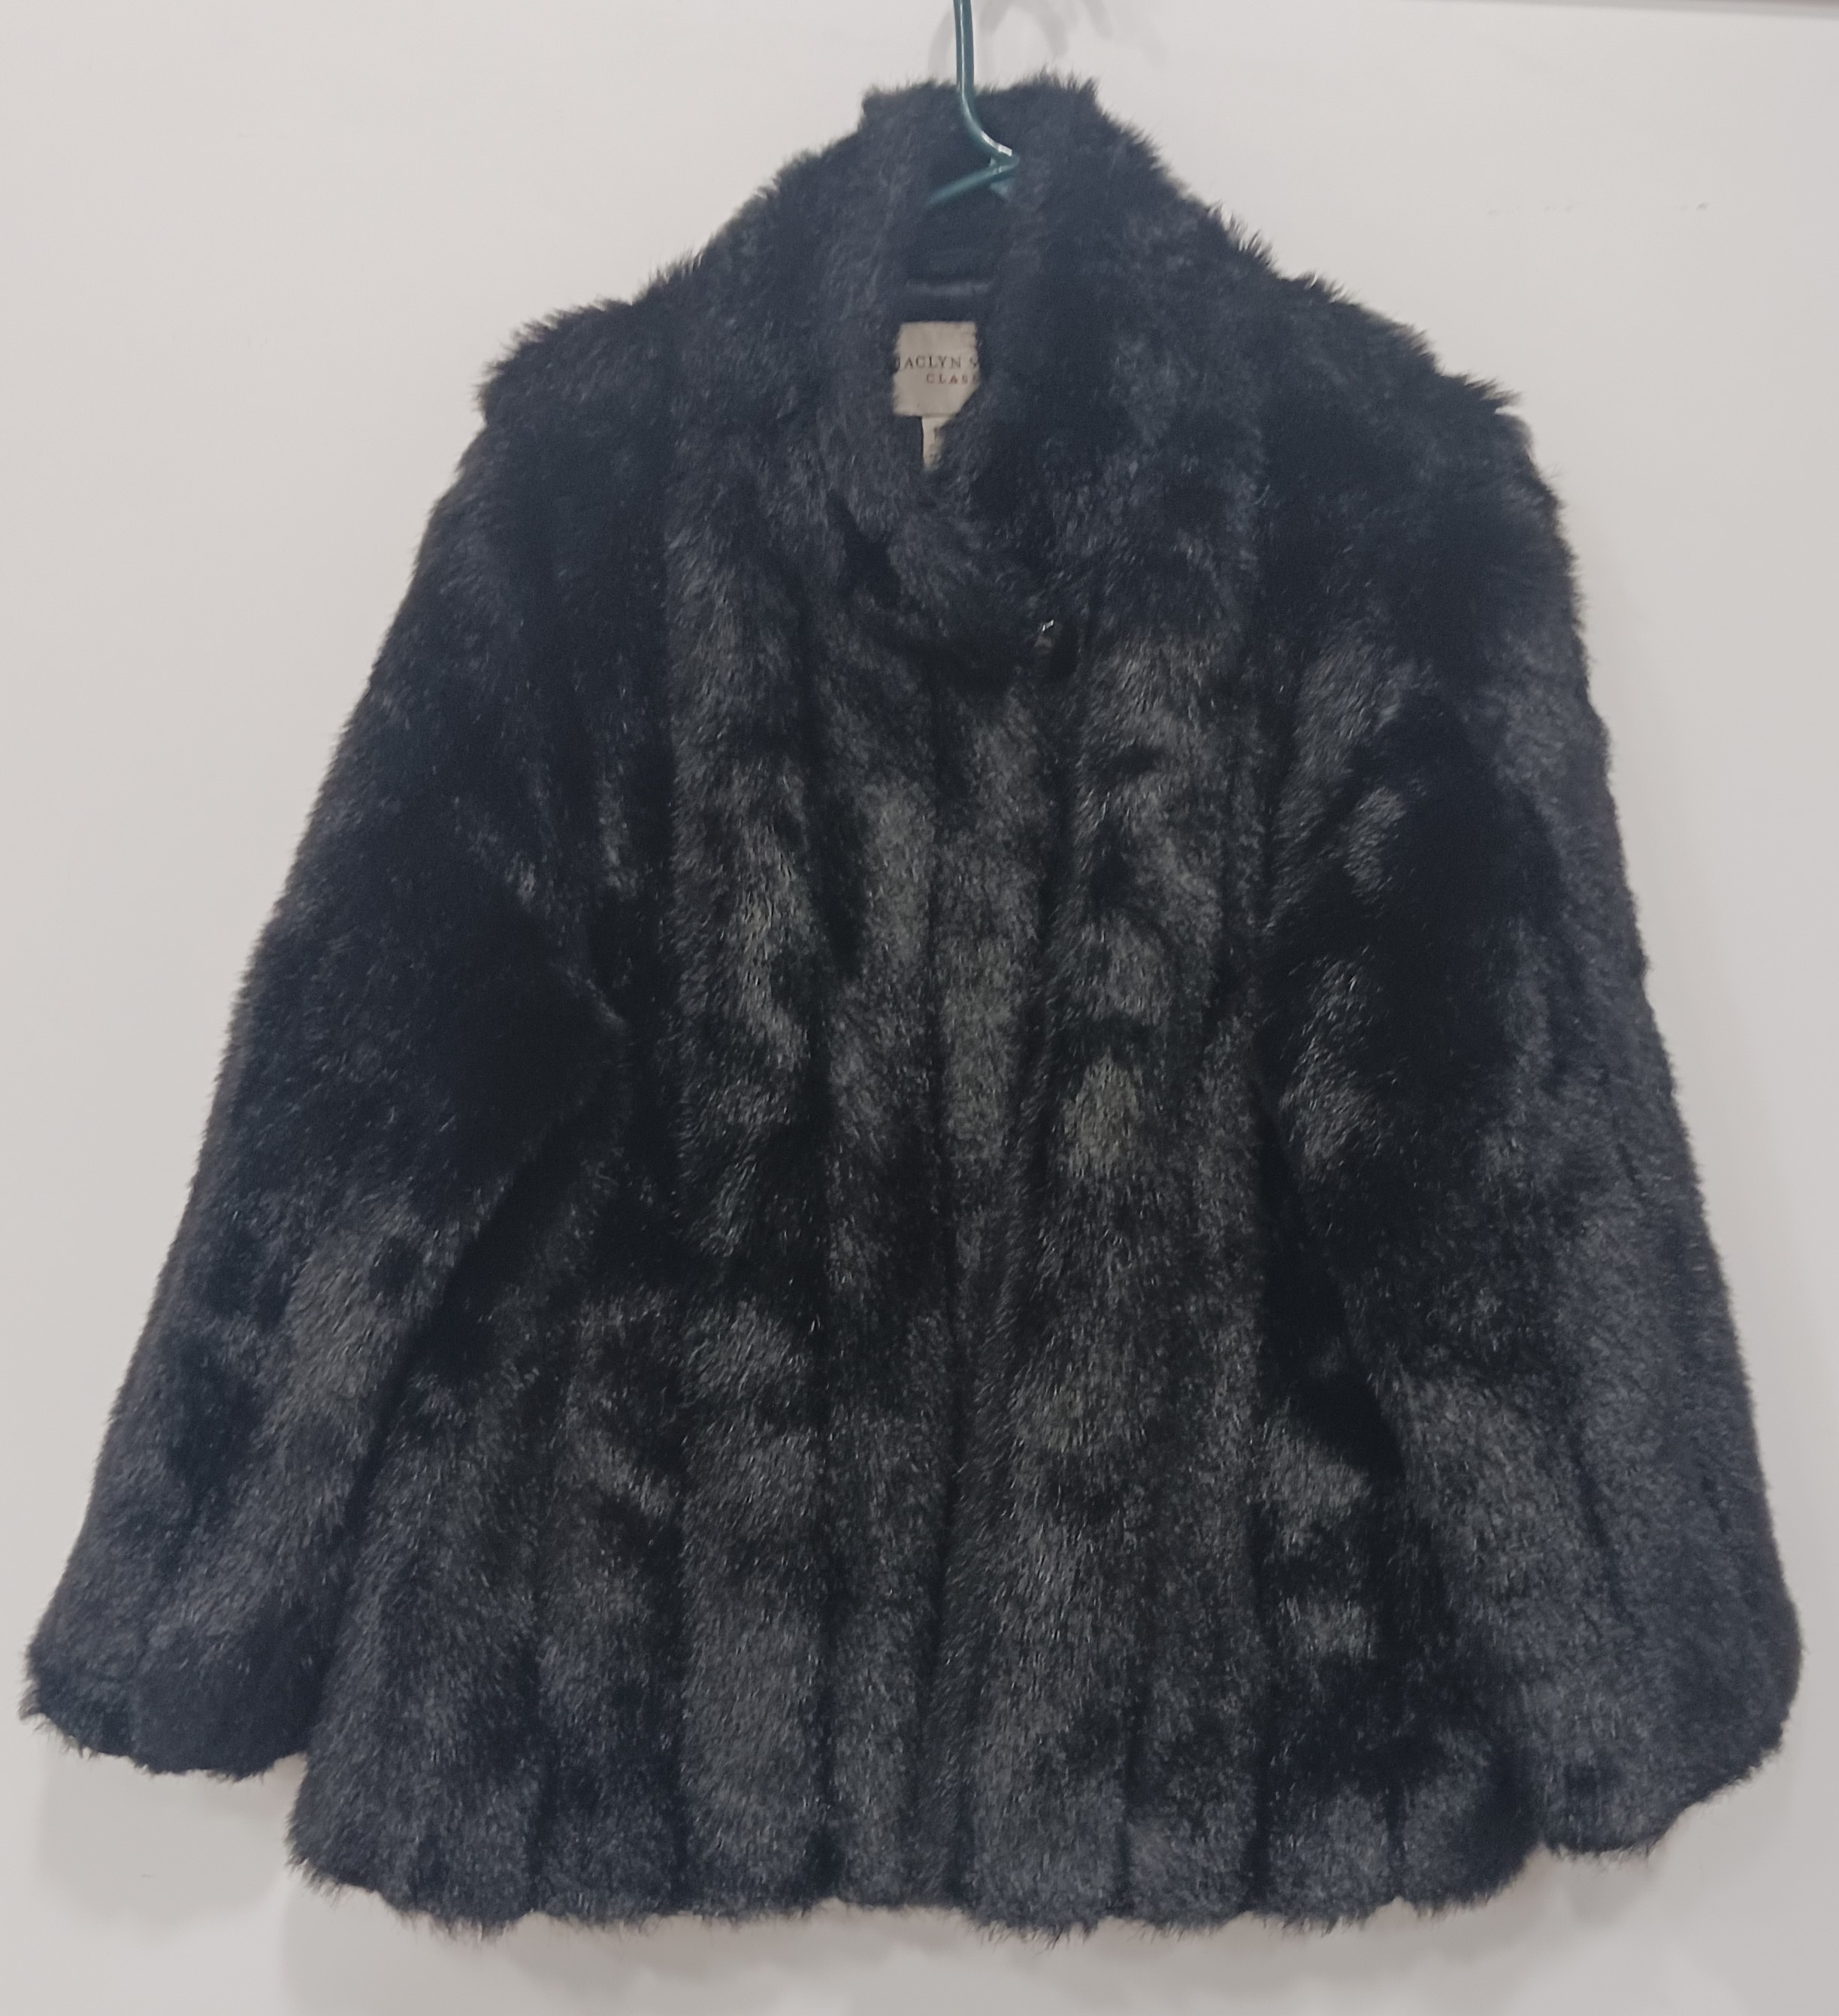 Buy the Jaclyn Smith Fur Jacket Women's Size Xl | GoodwillFinds